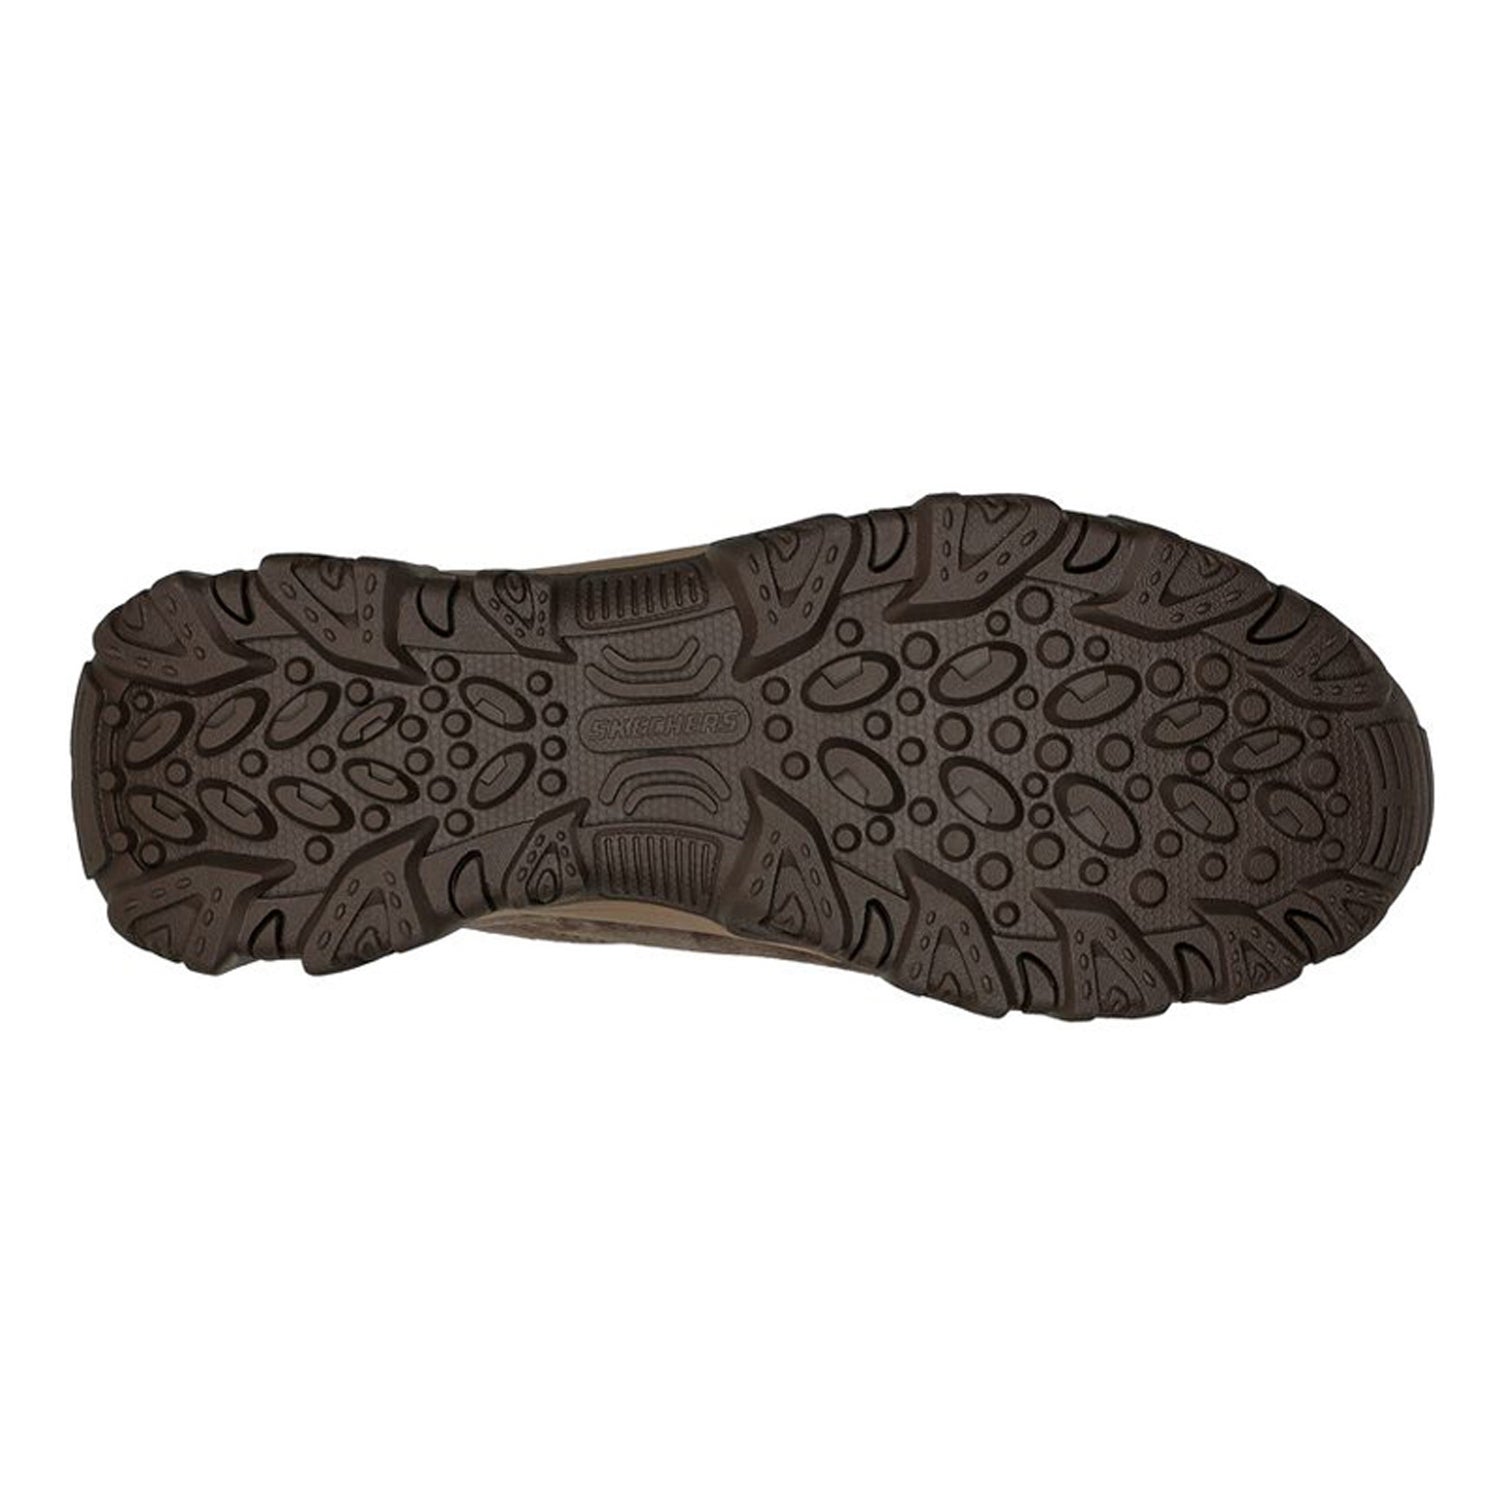 Peltz Shoes  Women's Skechers Relaxed Fit: Arch Fit Compulsions - Mementos Boot Chocolate 100552-CHOC